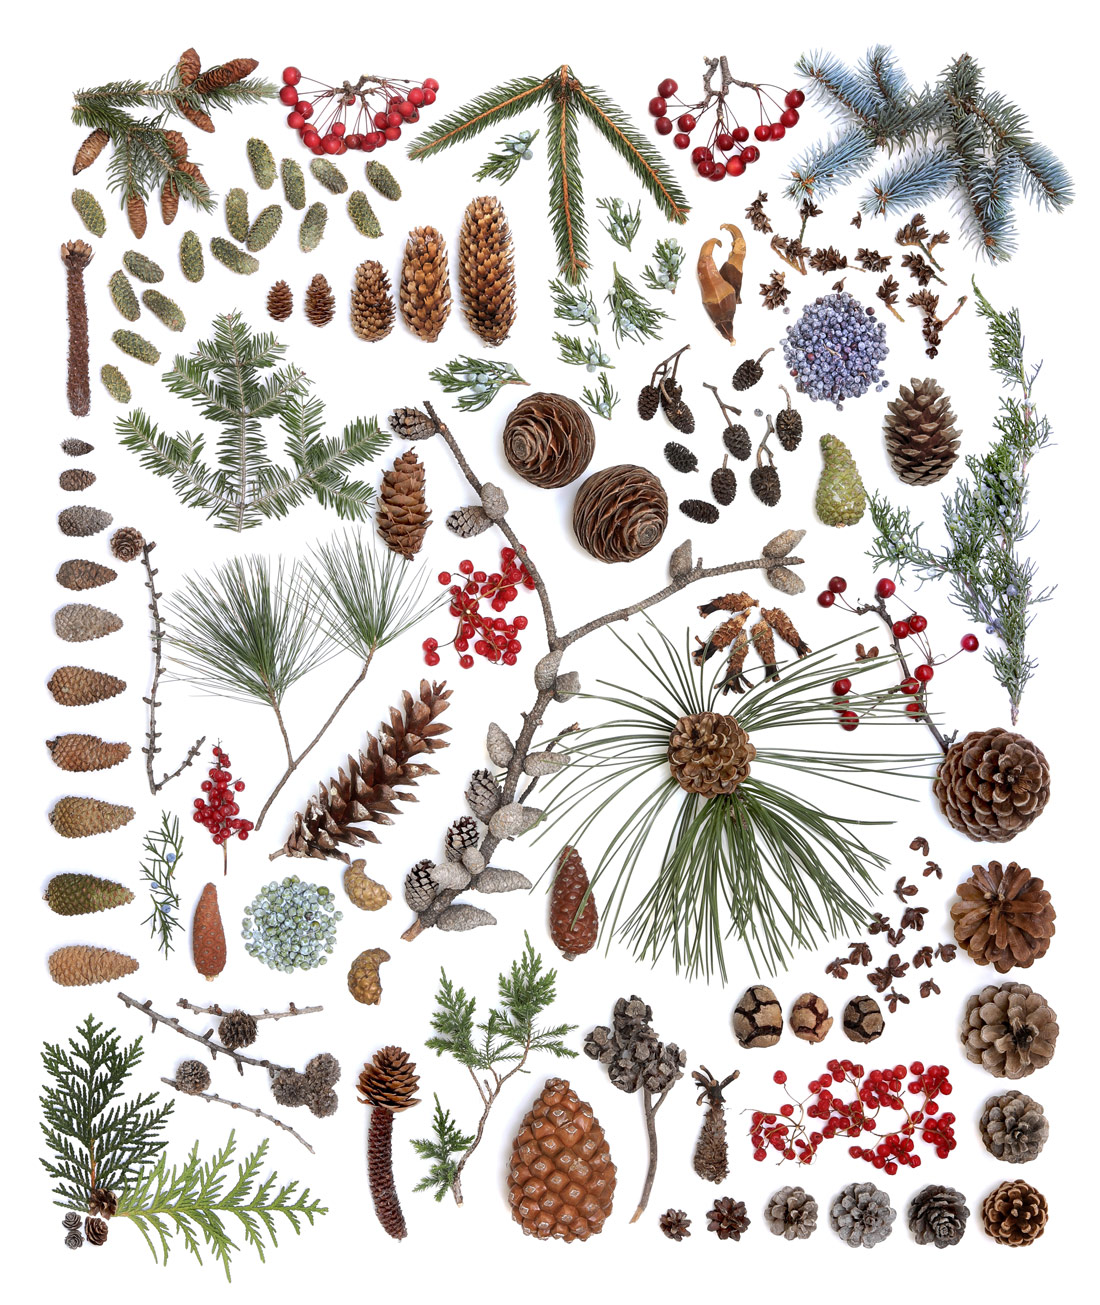 still life with pine cones and evergreens